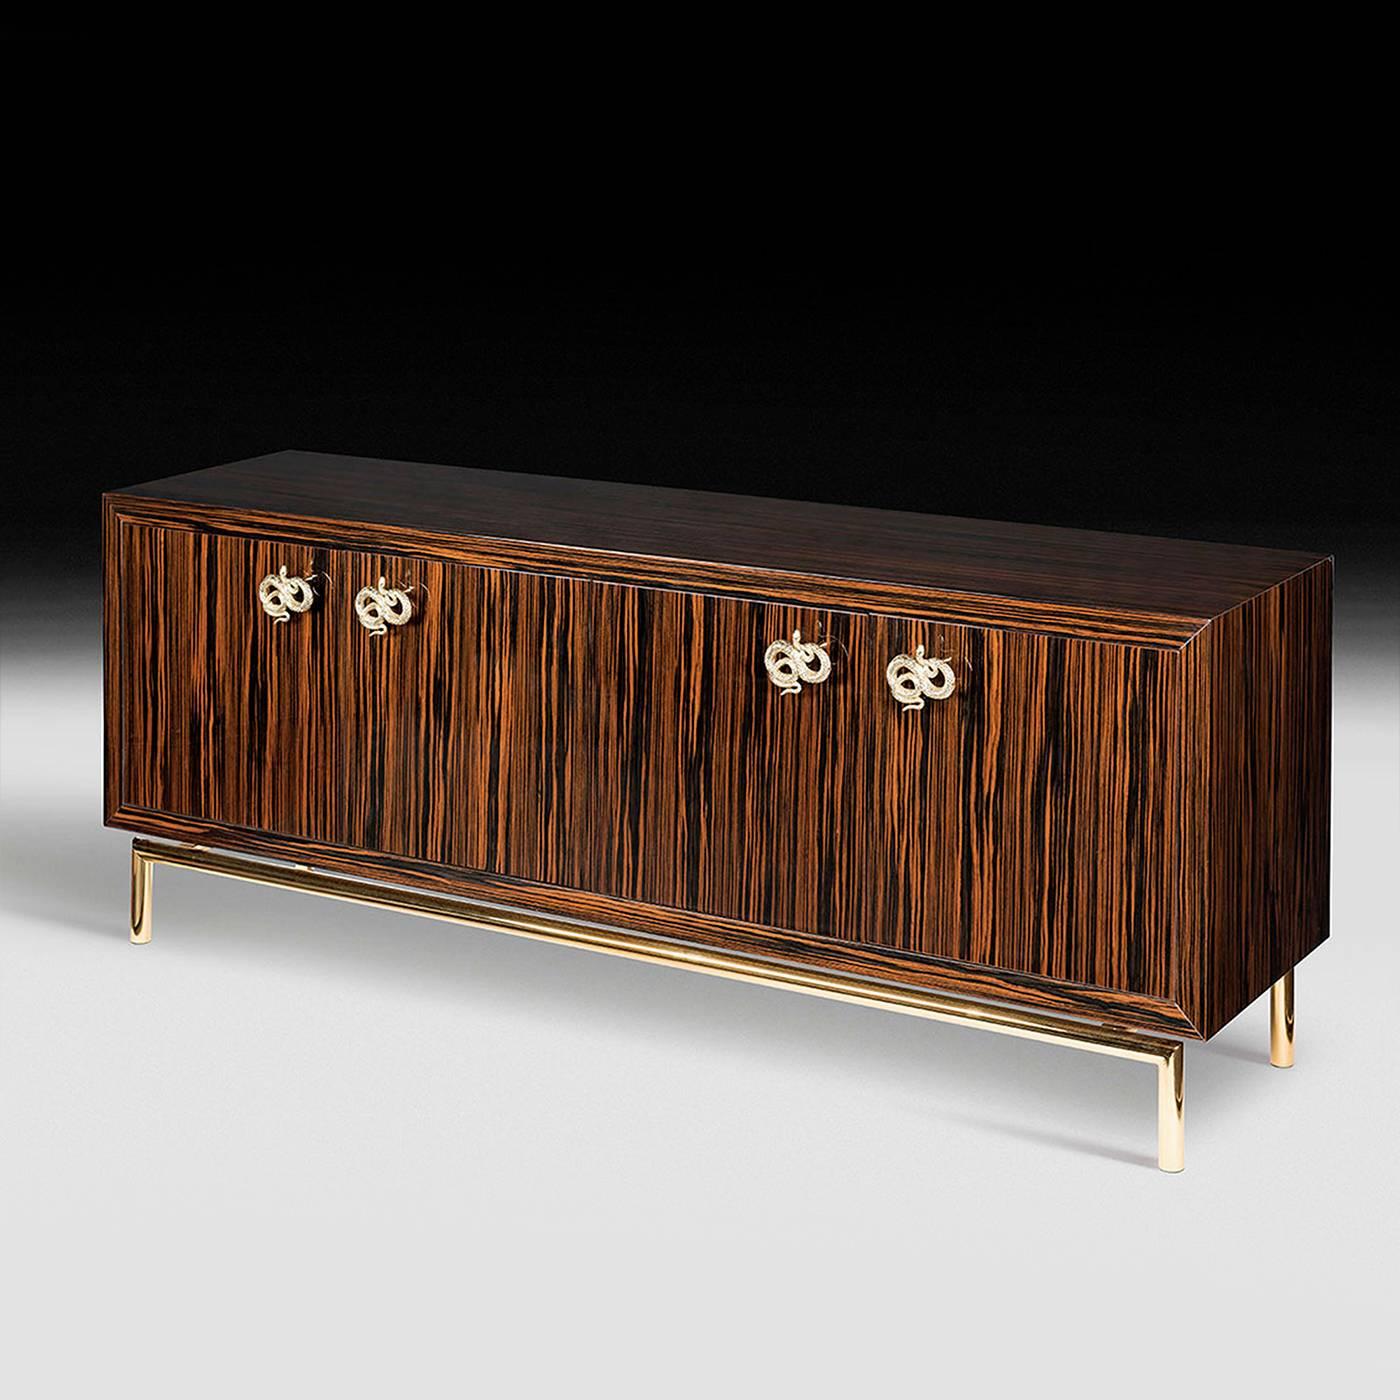 This refined four-door sideboard is part of the Original Sin collection created by designer Giorgio Ragazzini for VG. Its structure is made in authentic ebony wood with a glossy finish and 45-degree junctions. The edges and back have glossy brushed